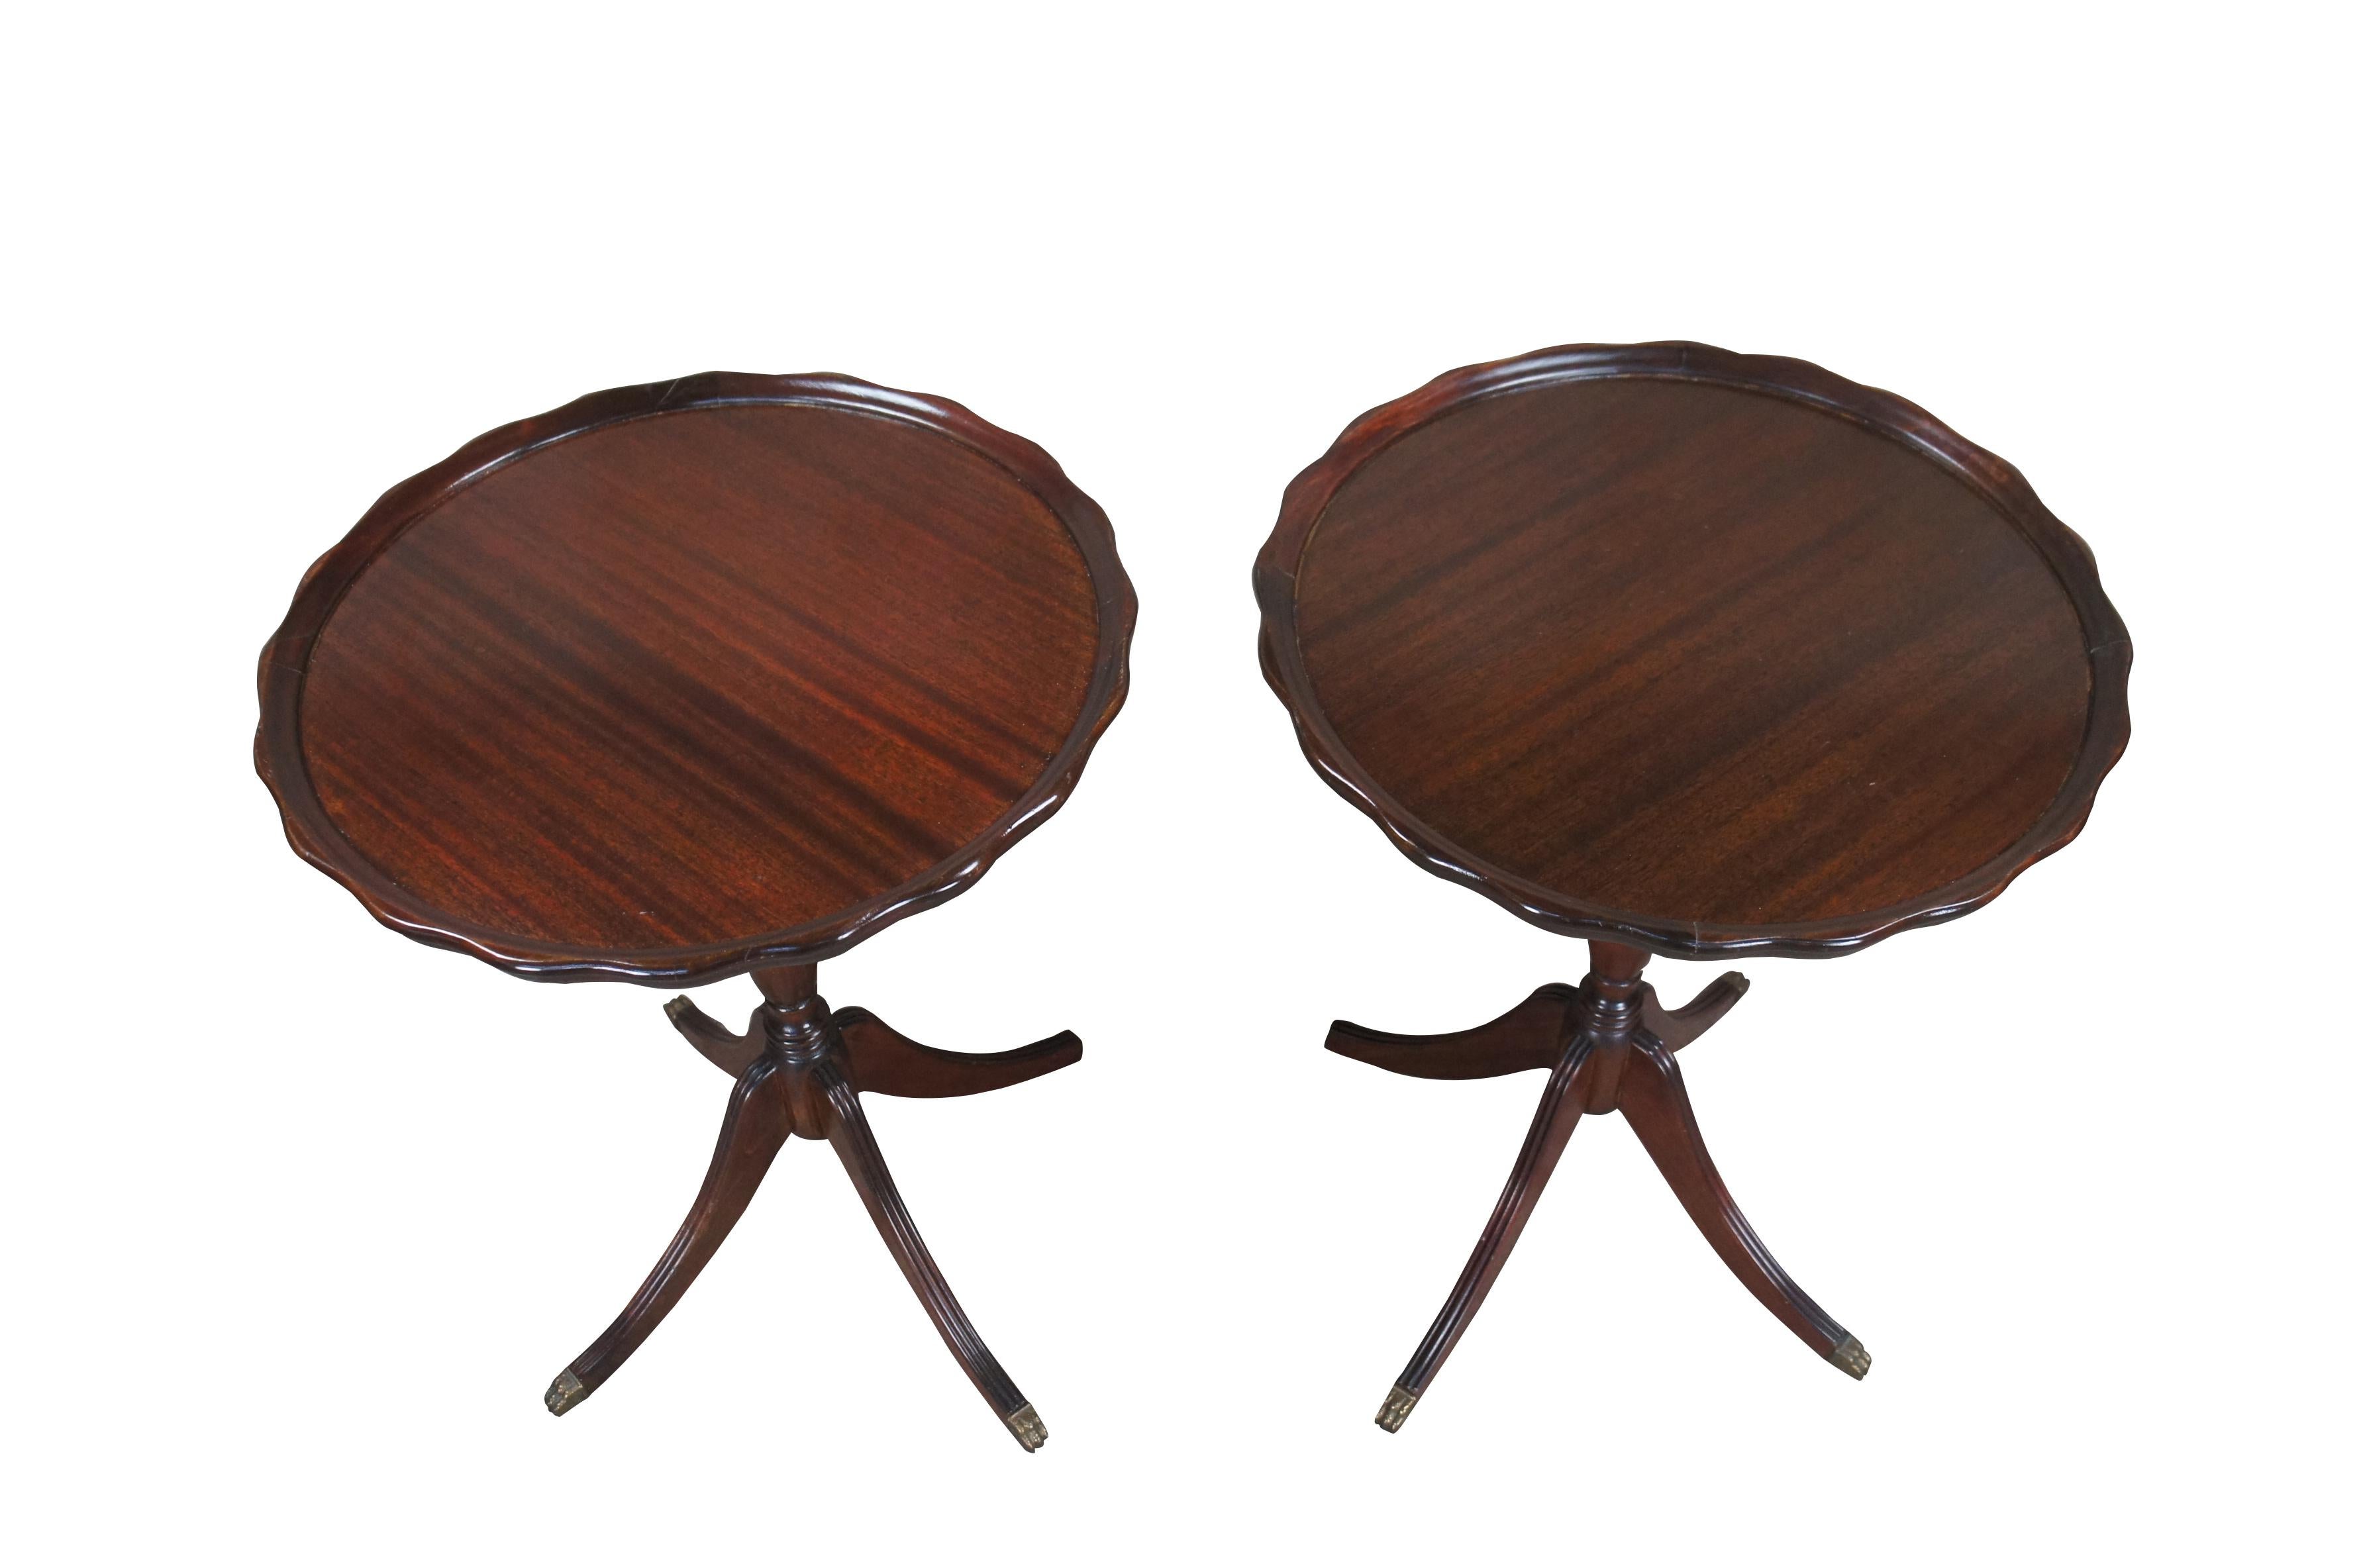 1940s Duncan Phyfe style pie crust tables.  Made from mahogany with an inset scalloped top over a turned support with downswept fluted Duncan Phyfe legs and brass capped paw feet. 

Dimensions:
22